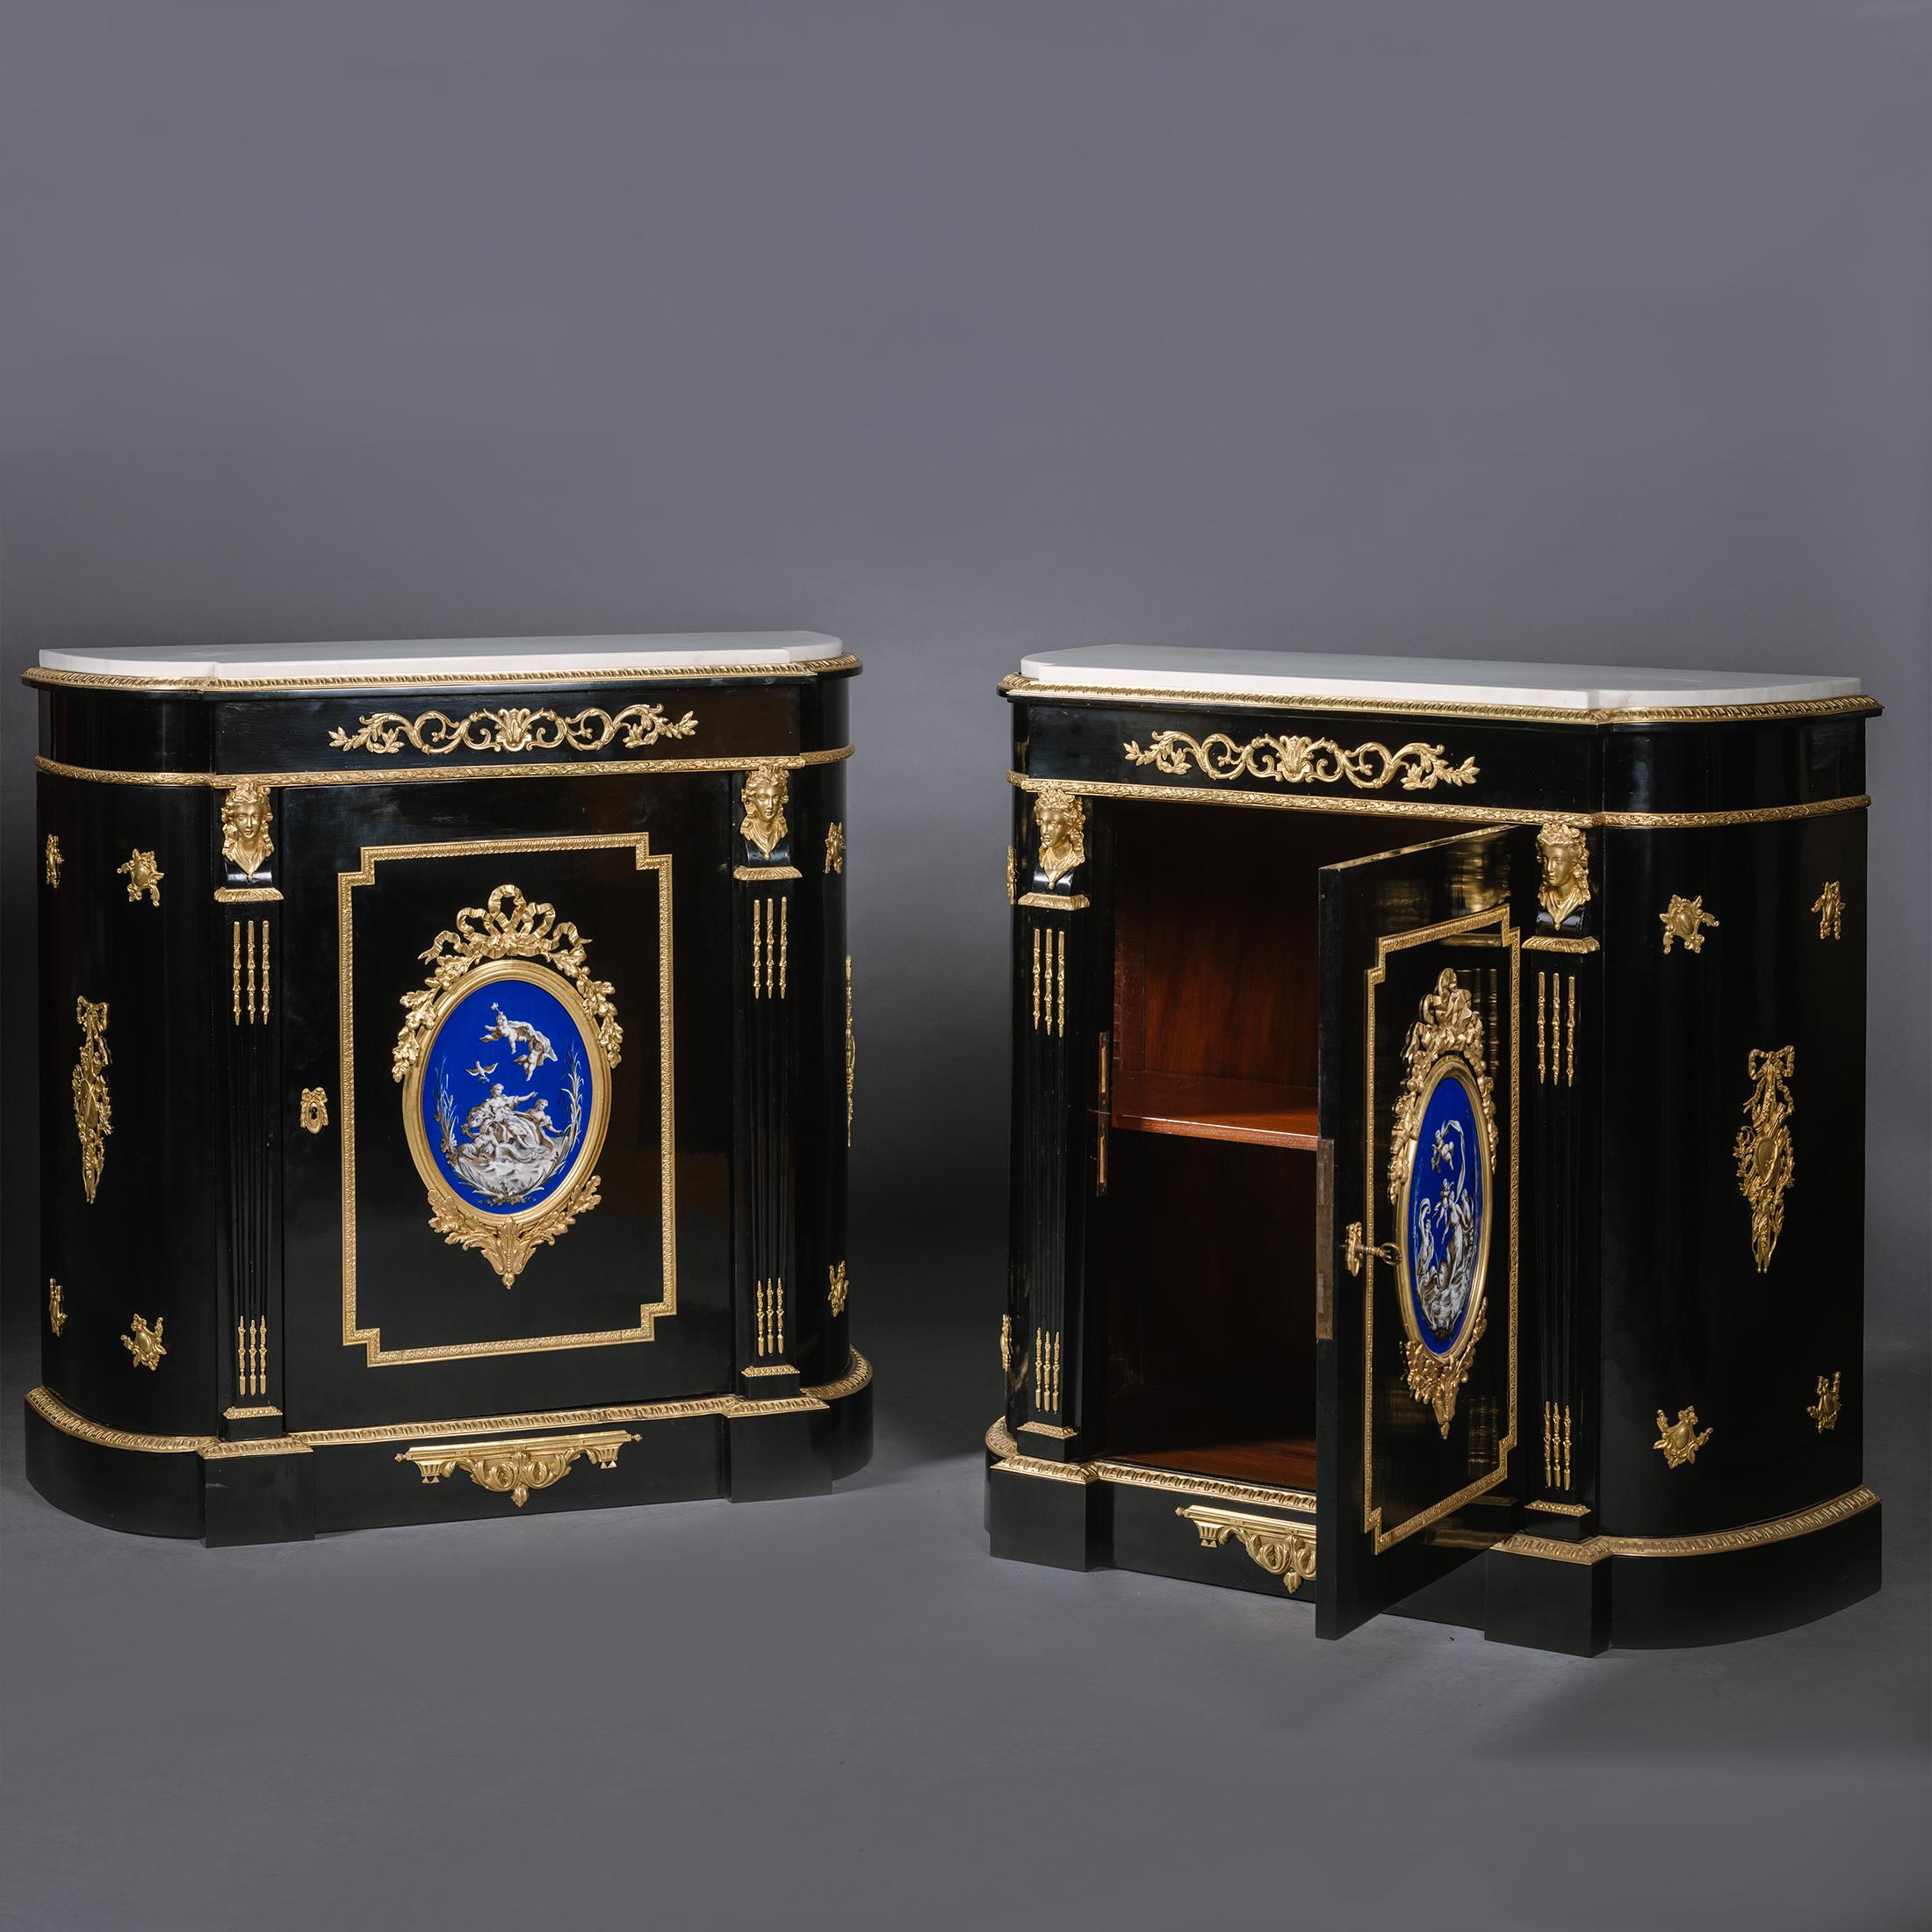 A Pair Napoleon III Gilt-Bronze And Porcelain-Mounted Ebonised Cabinets, 'Meubles à hauteur d'appui'.

Each with 'D'-shaped inset white marble top above a frieze applied to the front with a scrolled gilt-bronze mount. The central doors with a